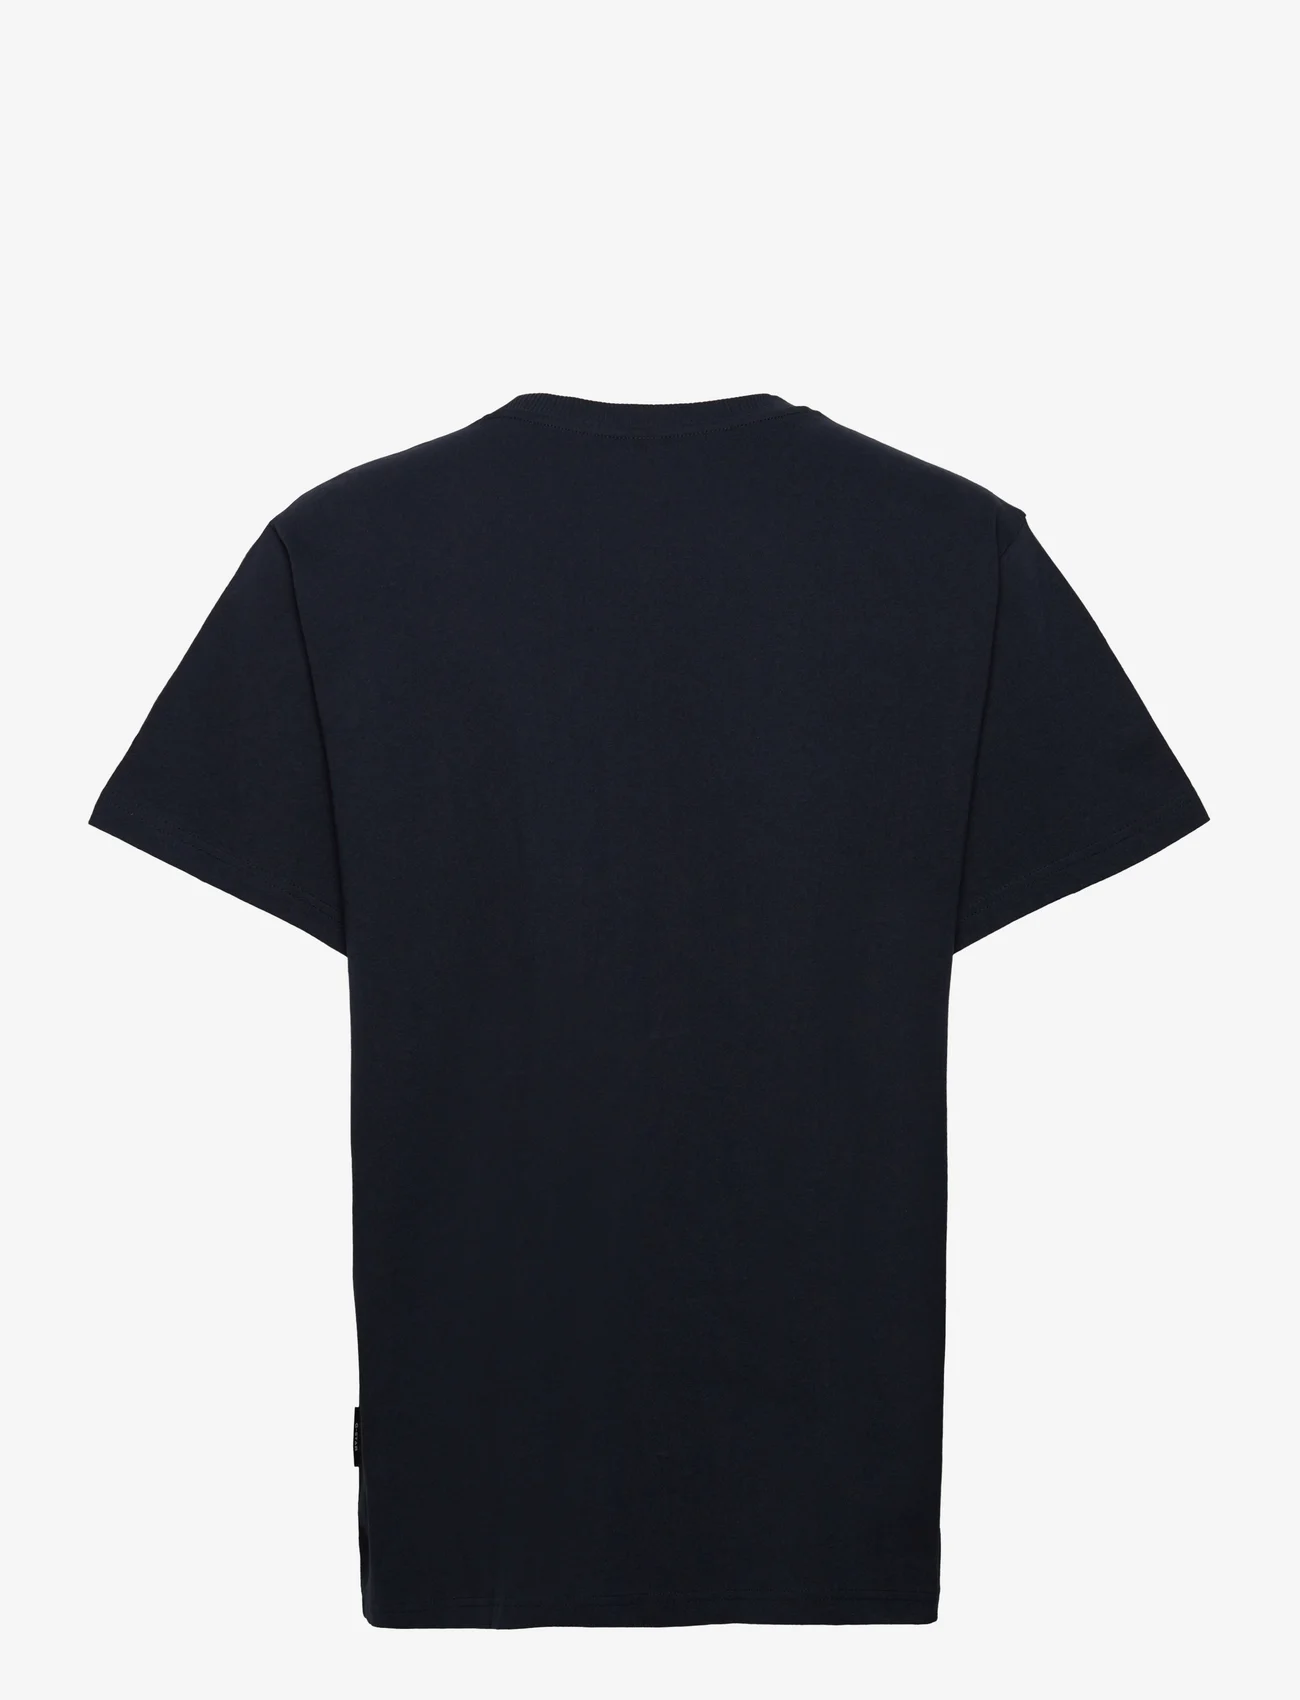 G-Star RAW - Loose r t s\s - basic t-shirts - salute - 1